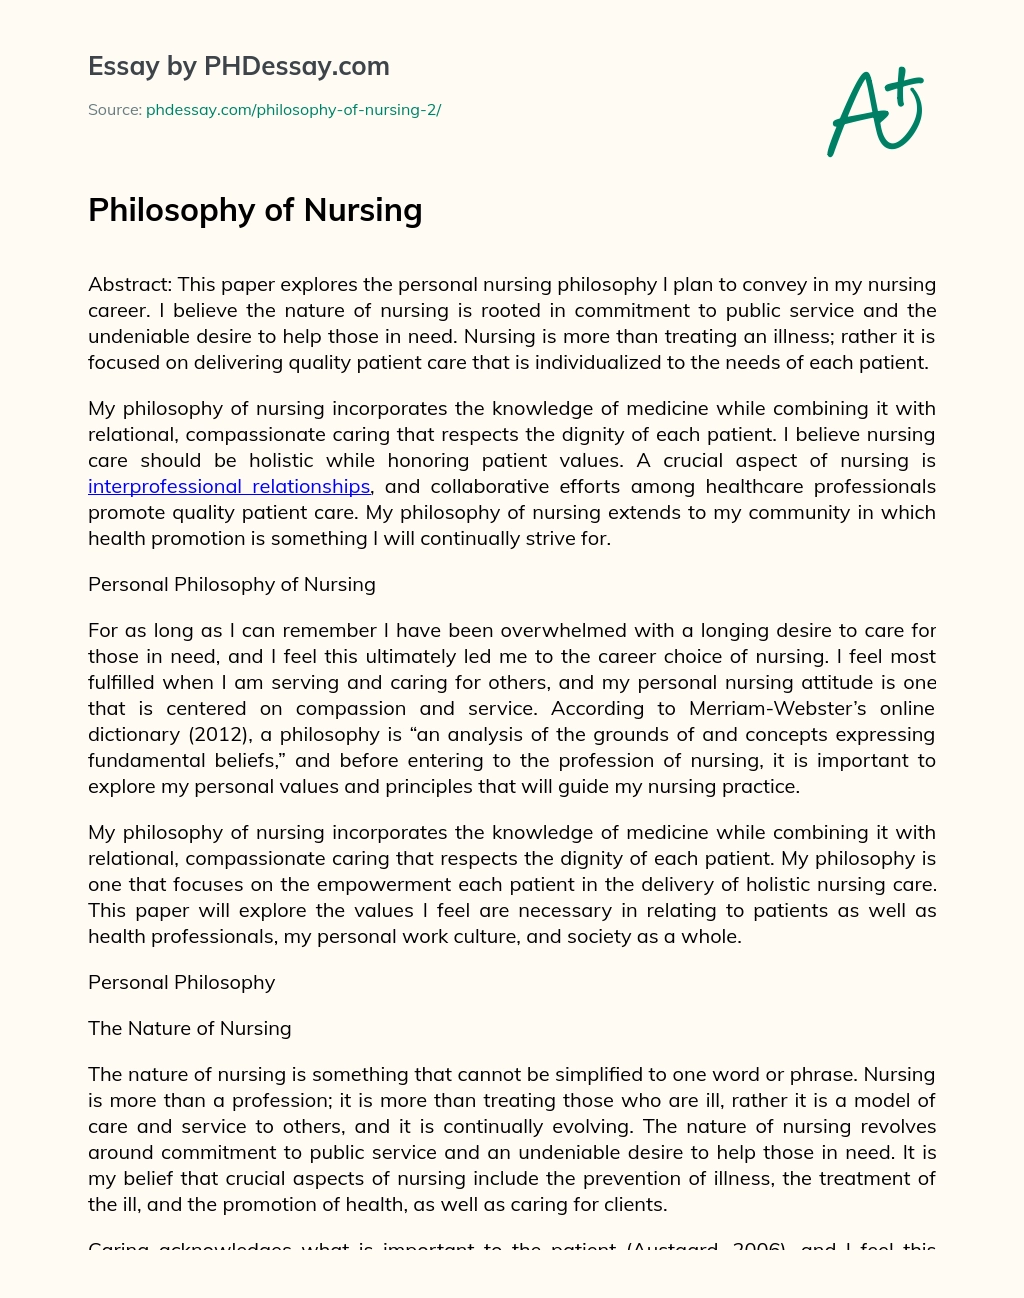 Personal Nursing Philosophy: Compassionate, Individualized Care for Patients and Community essay